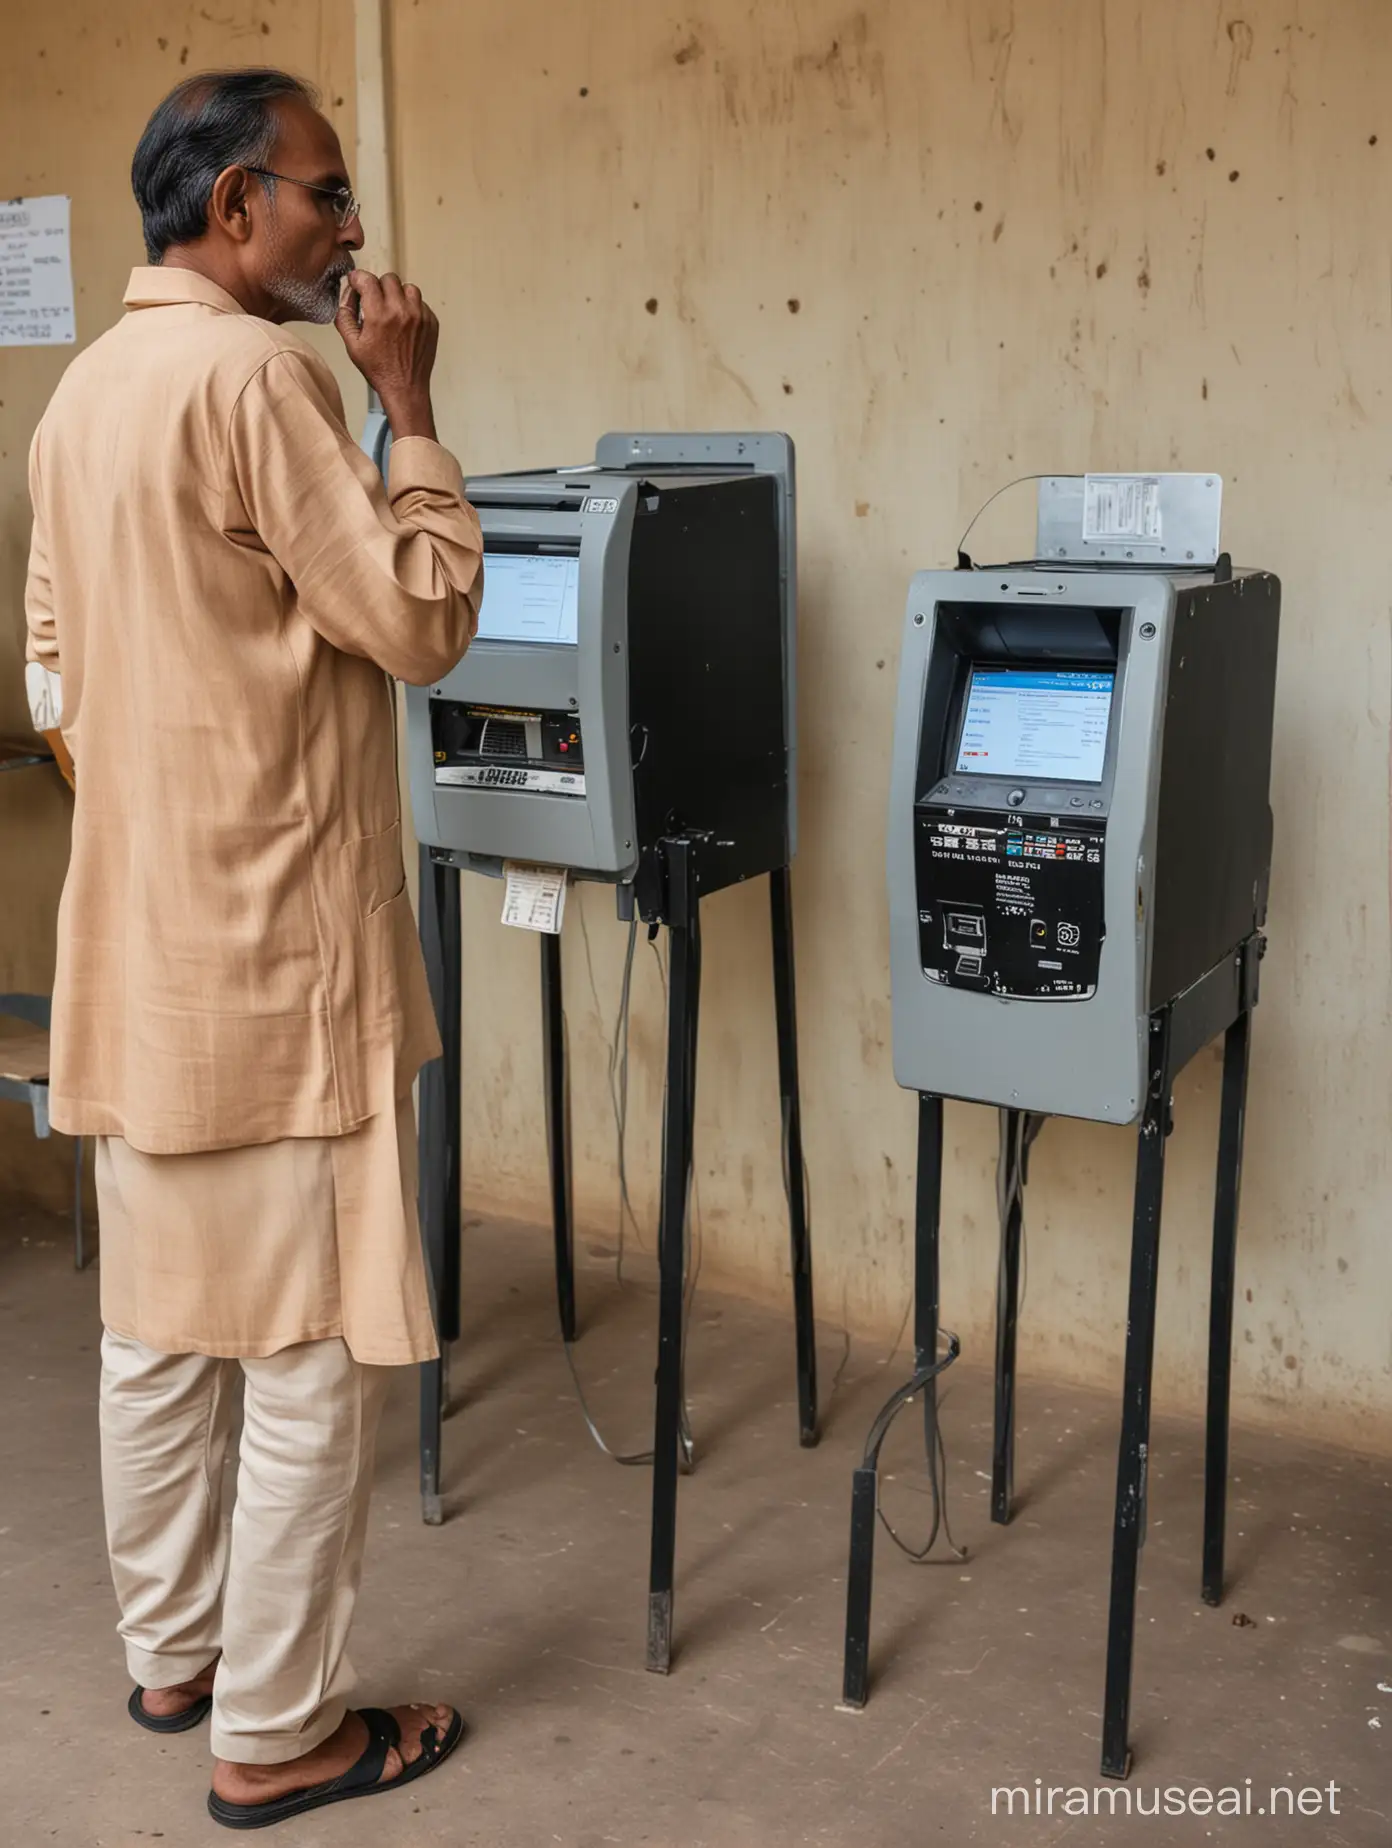 Indian Voter Thinking before voting, One ELectronic Voting machine beside